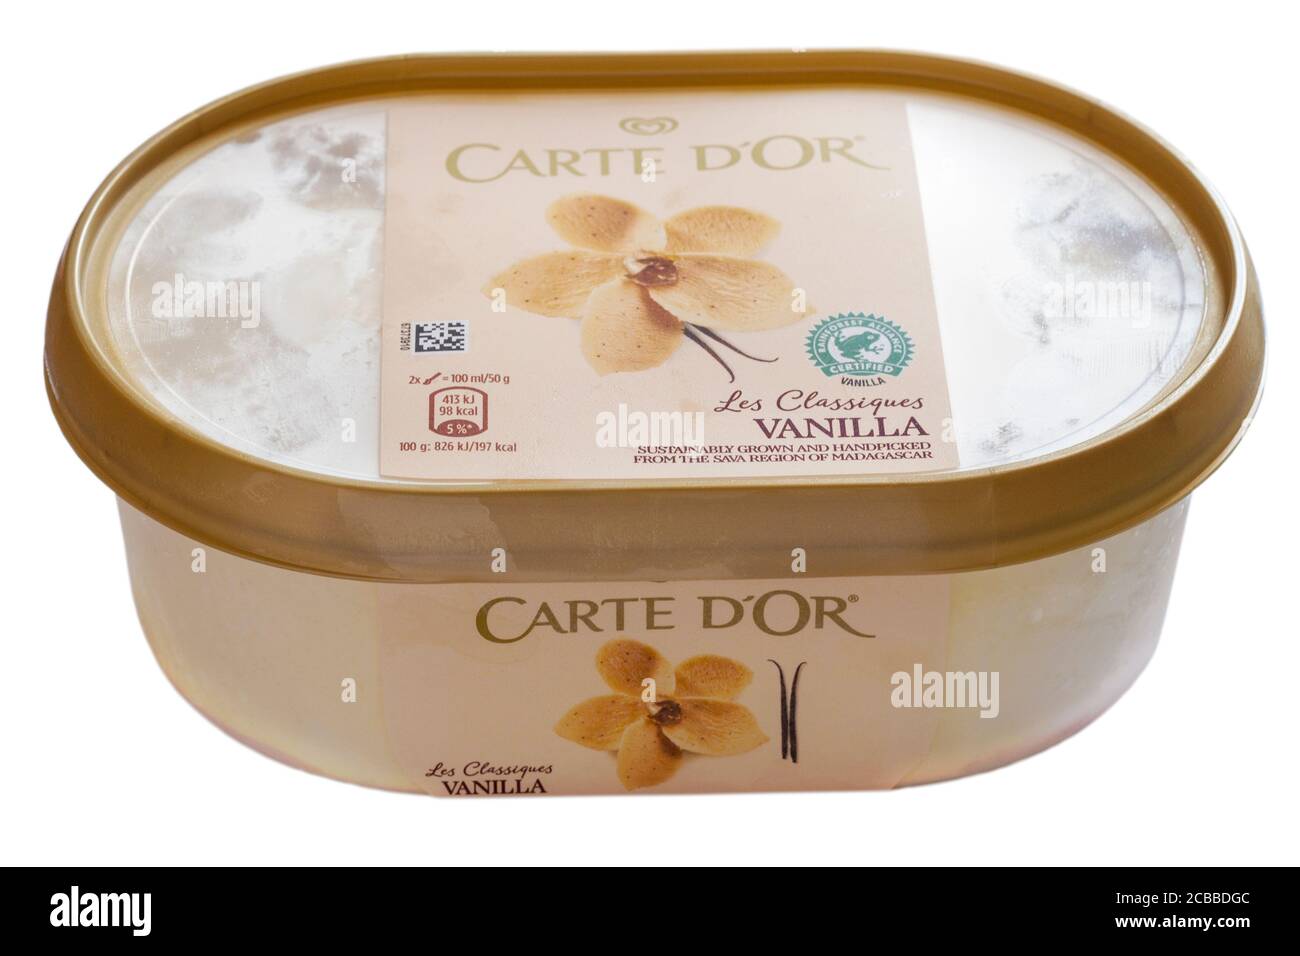 tub of Carte D'Or Les Classiques Vanilla ice cream sustainably grown and handpicked from the Sava region of Madagascar isolated on white background Stock Photo